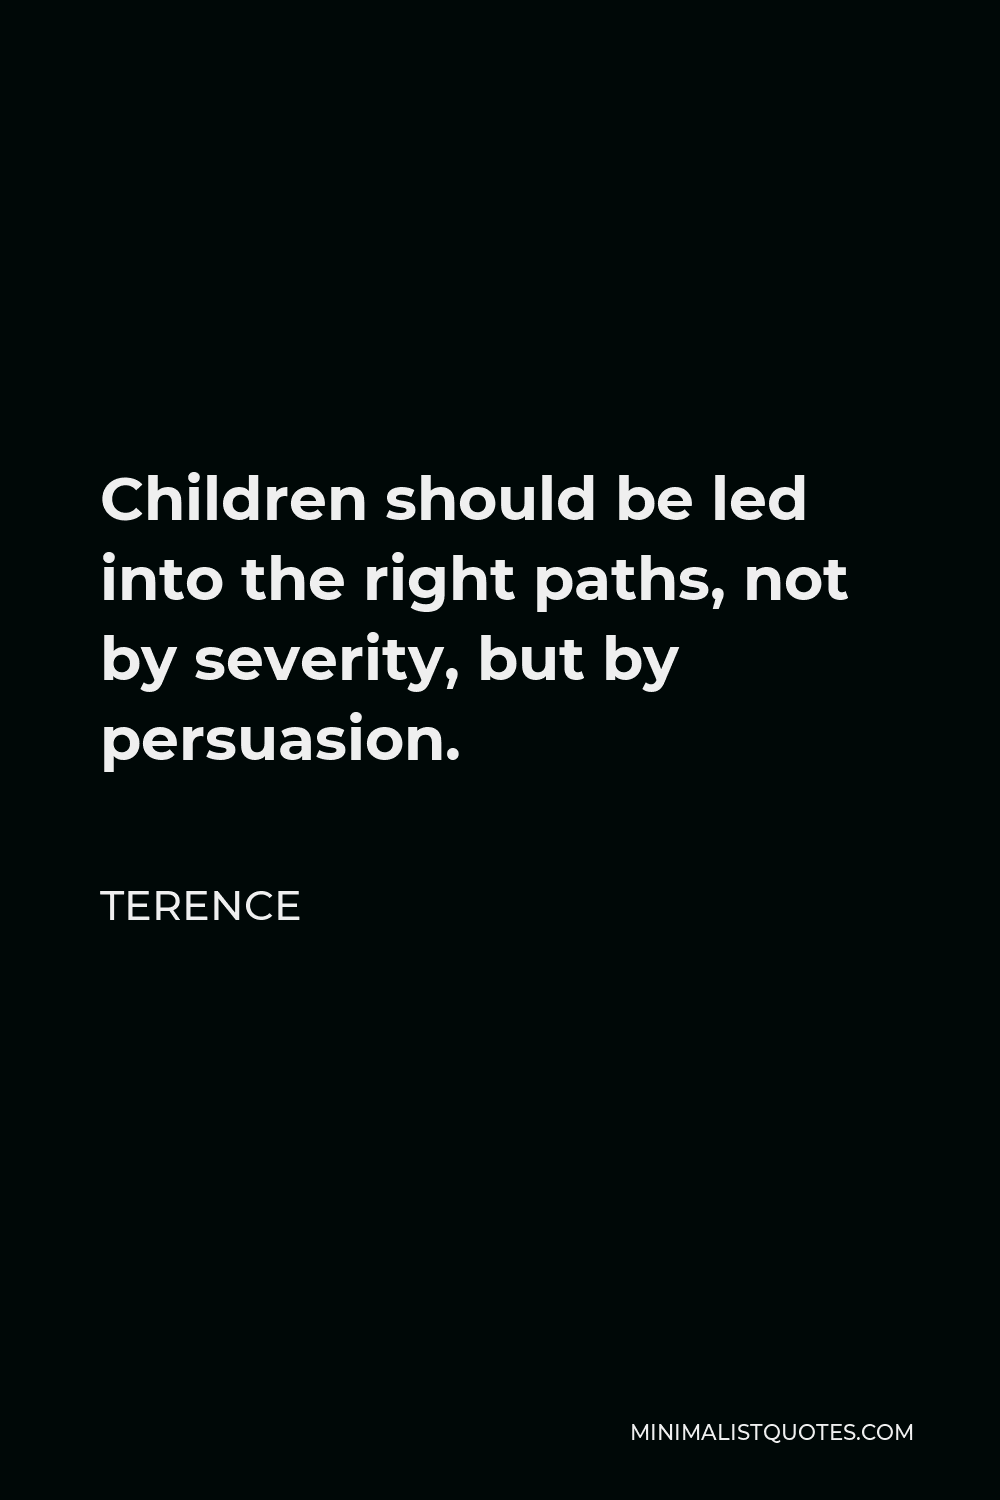 Terence Quote - Children should be led into the right paths, not by severity, but by persuasion.